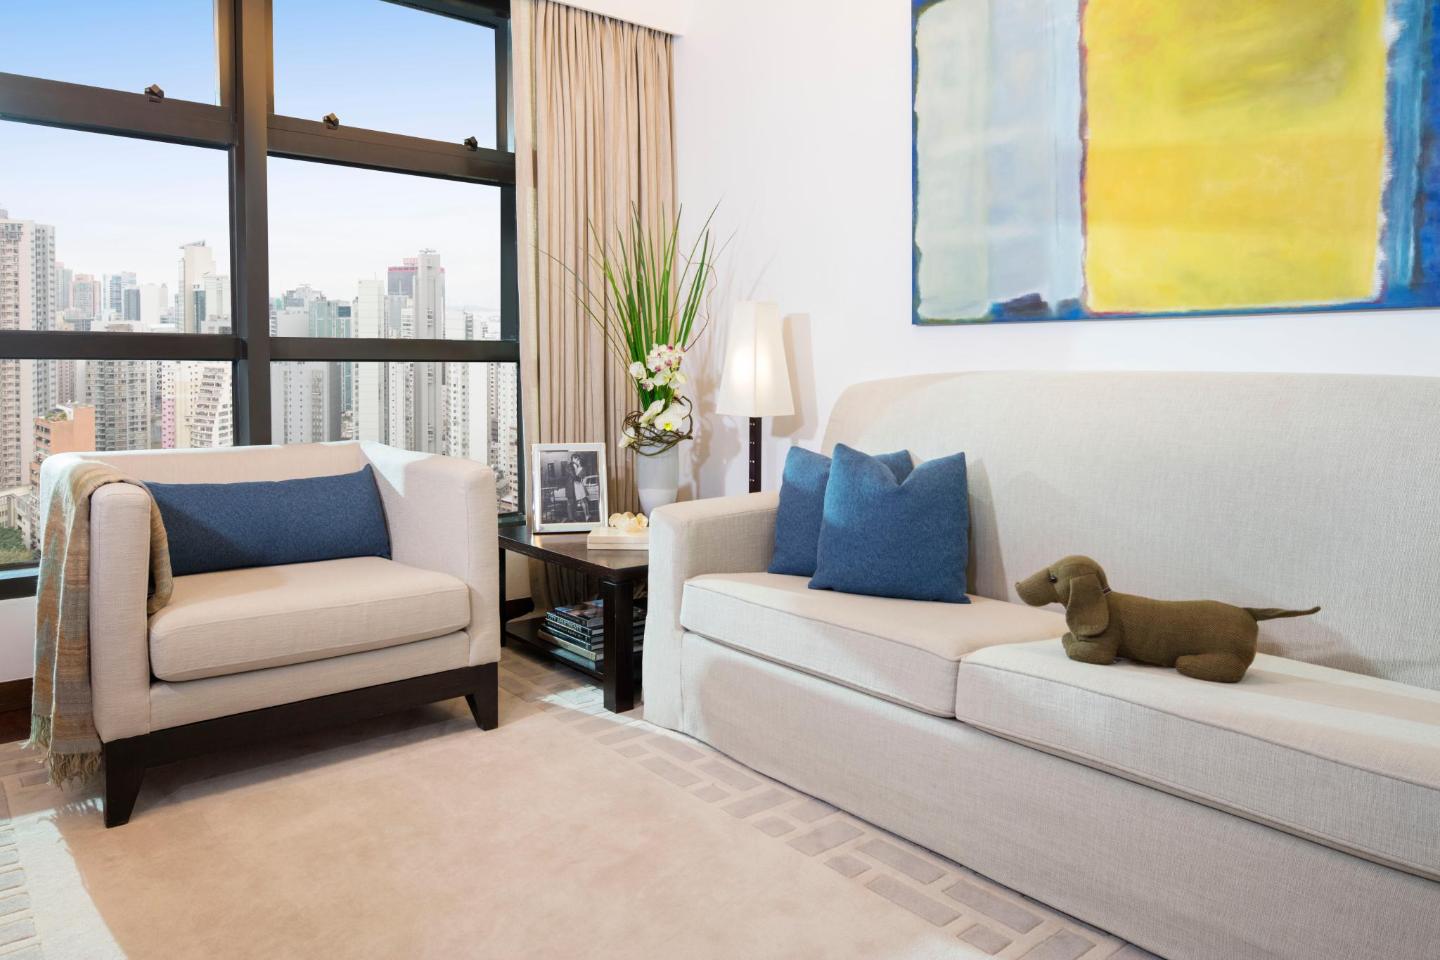 How to Make the Most of Your Serviced Apartment